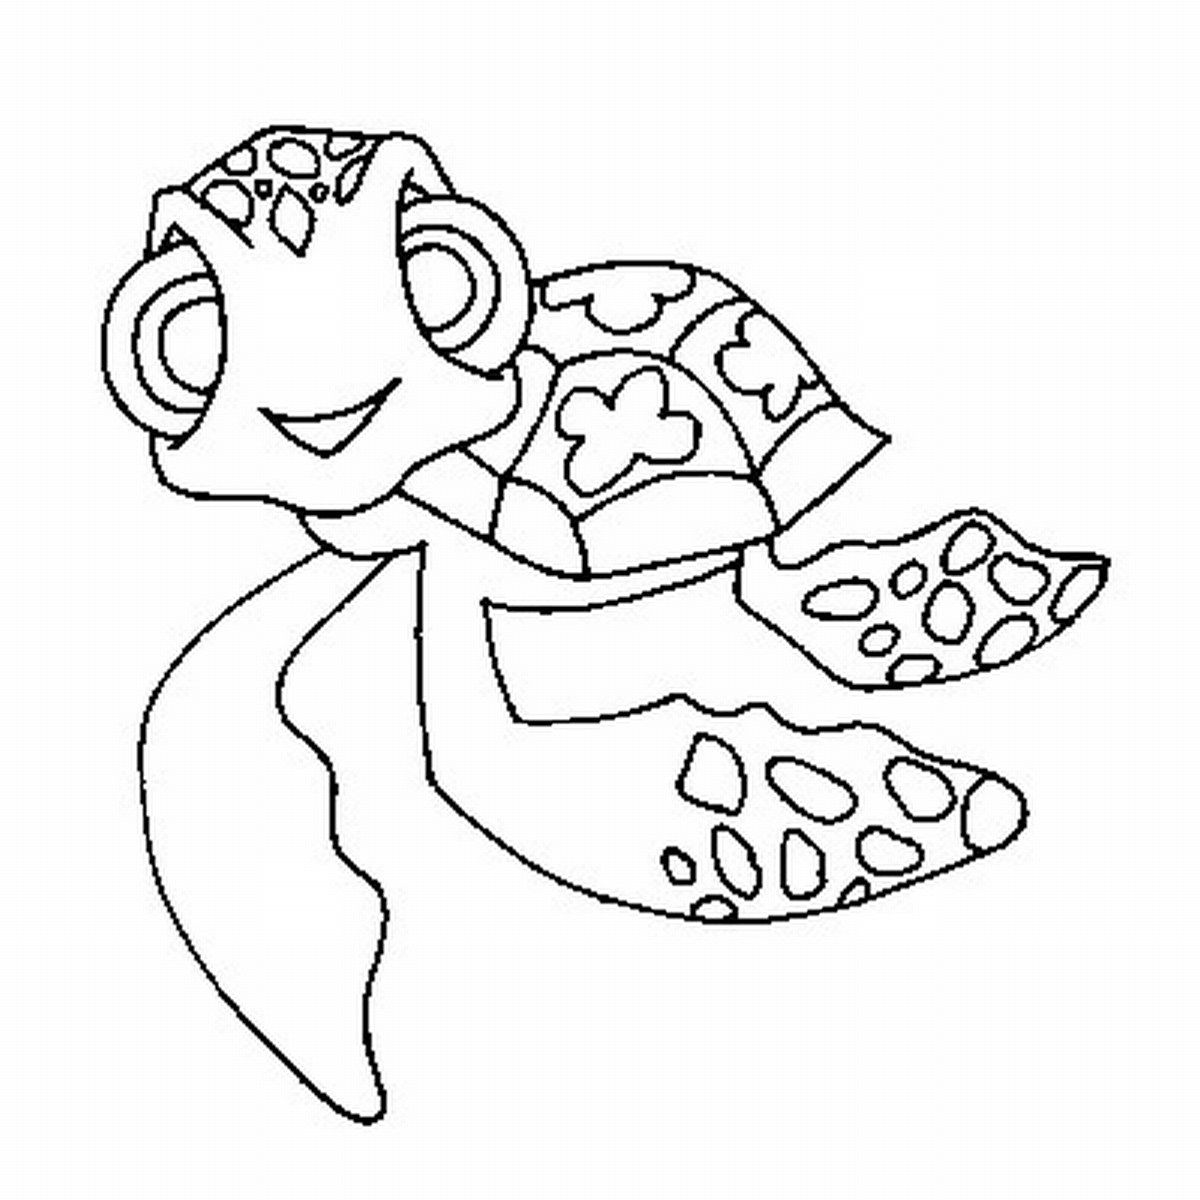 Sea Turtle - Coloring Pages for Kids and for Adults